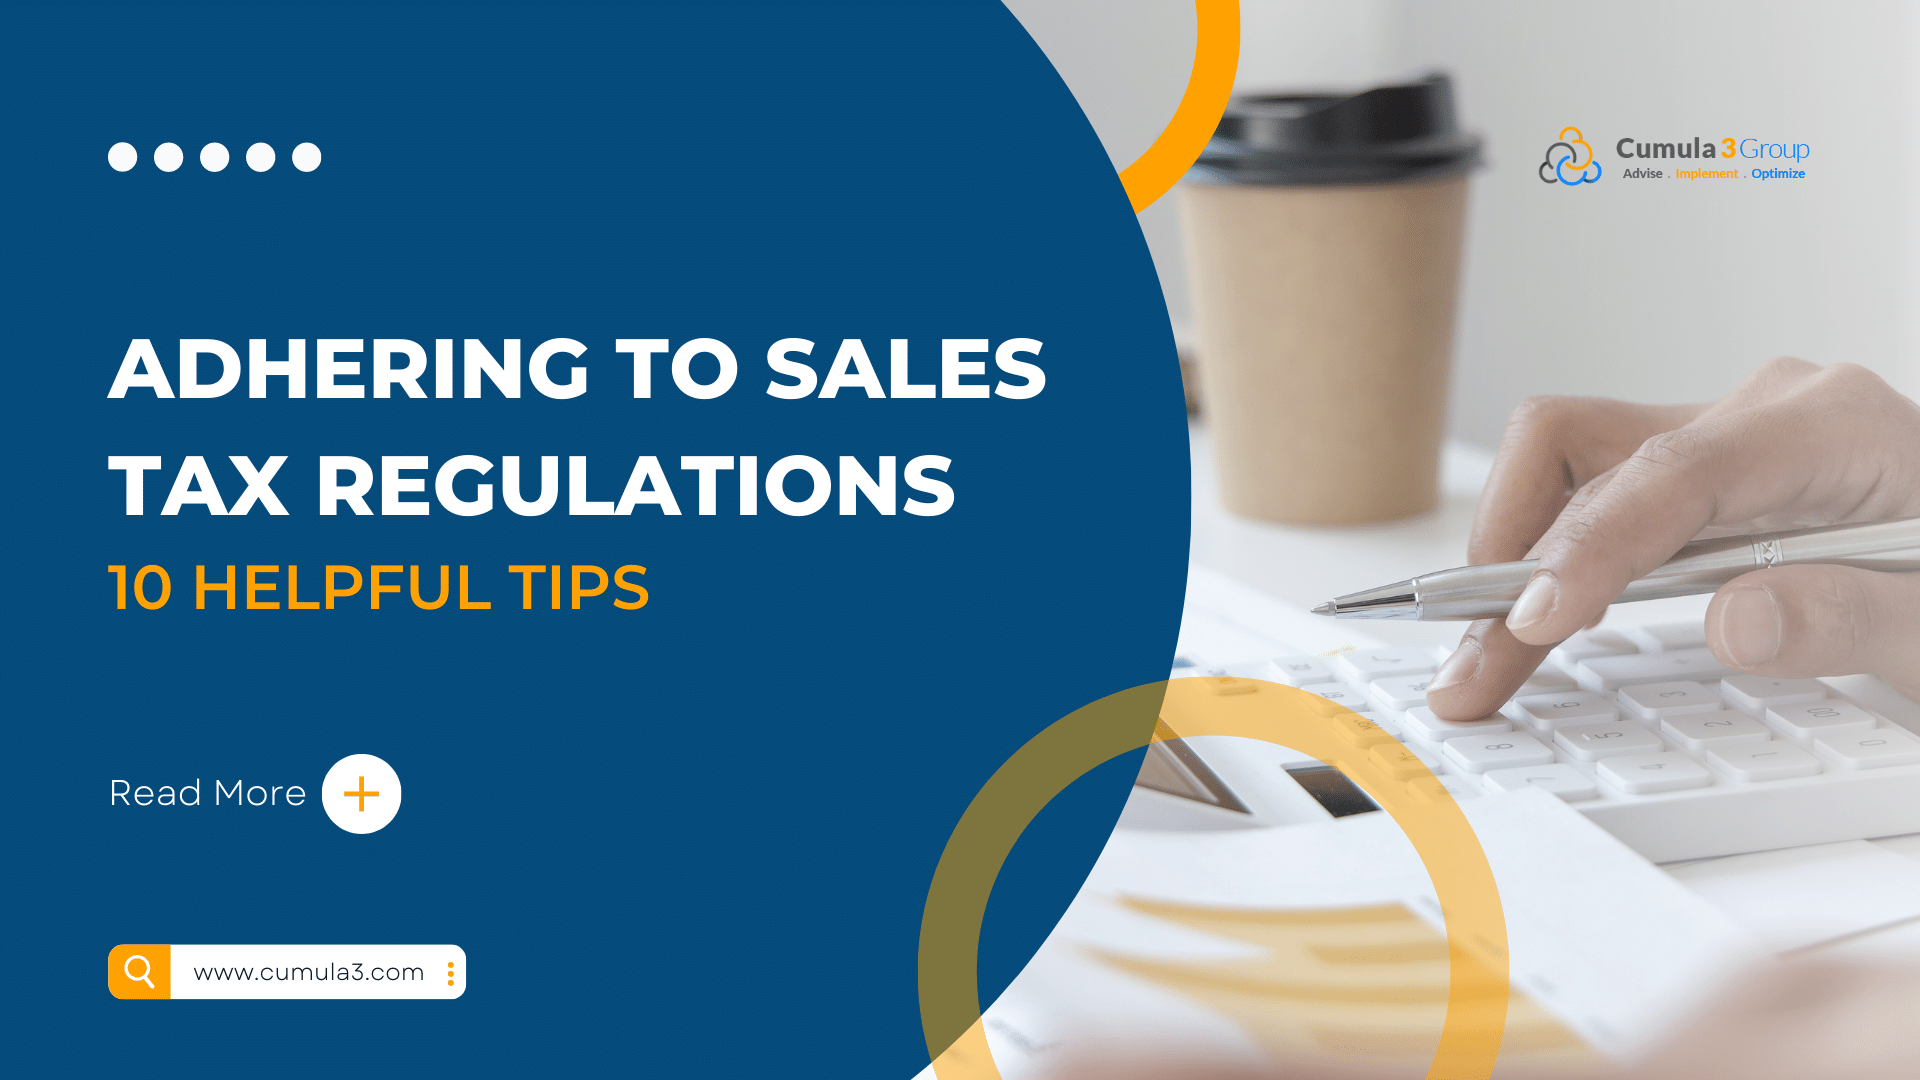 10 Tips for Complying with Sales Tax Regulations